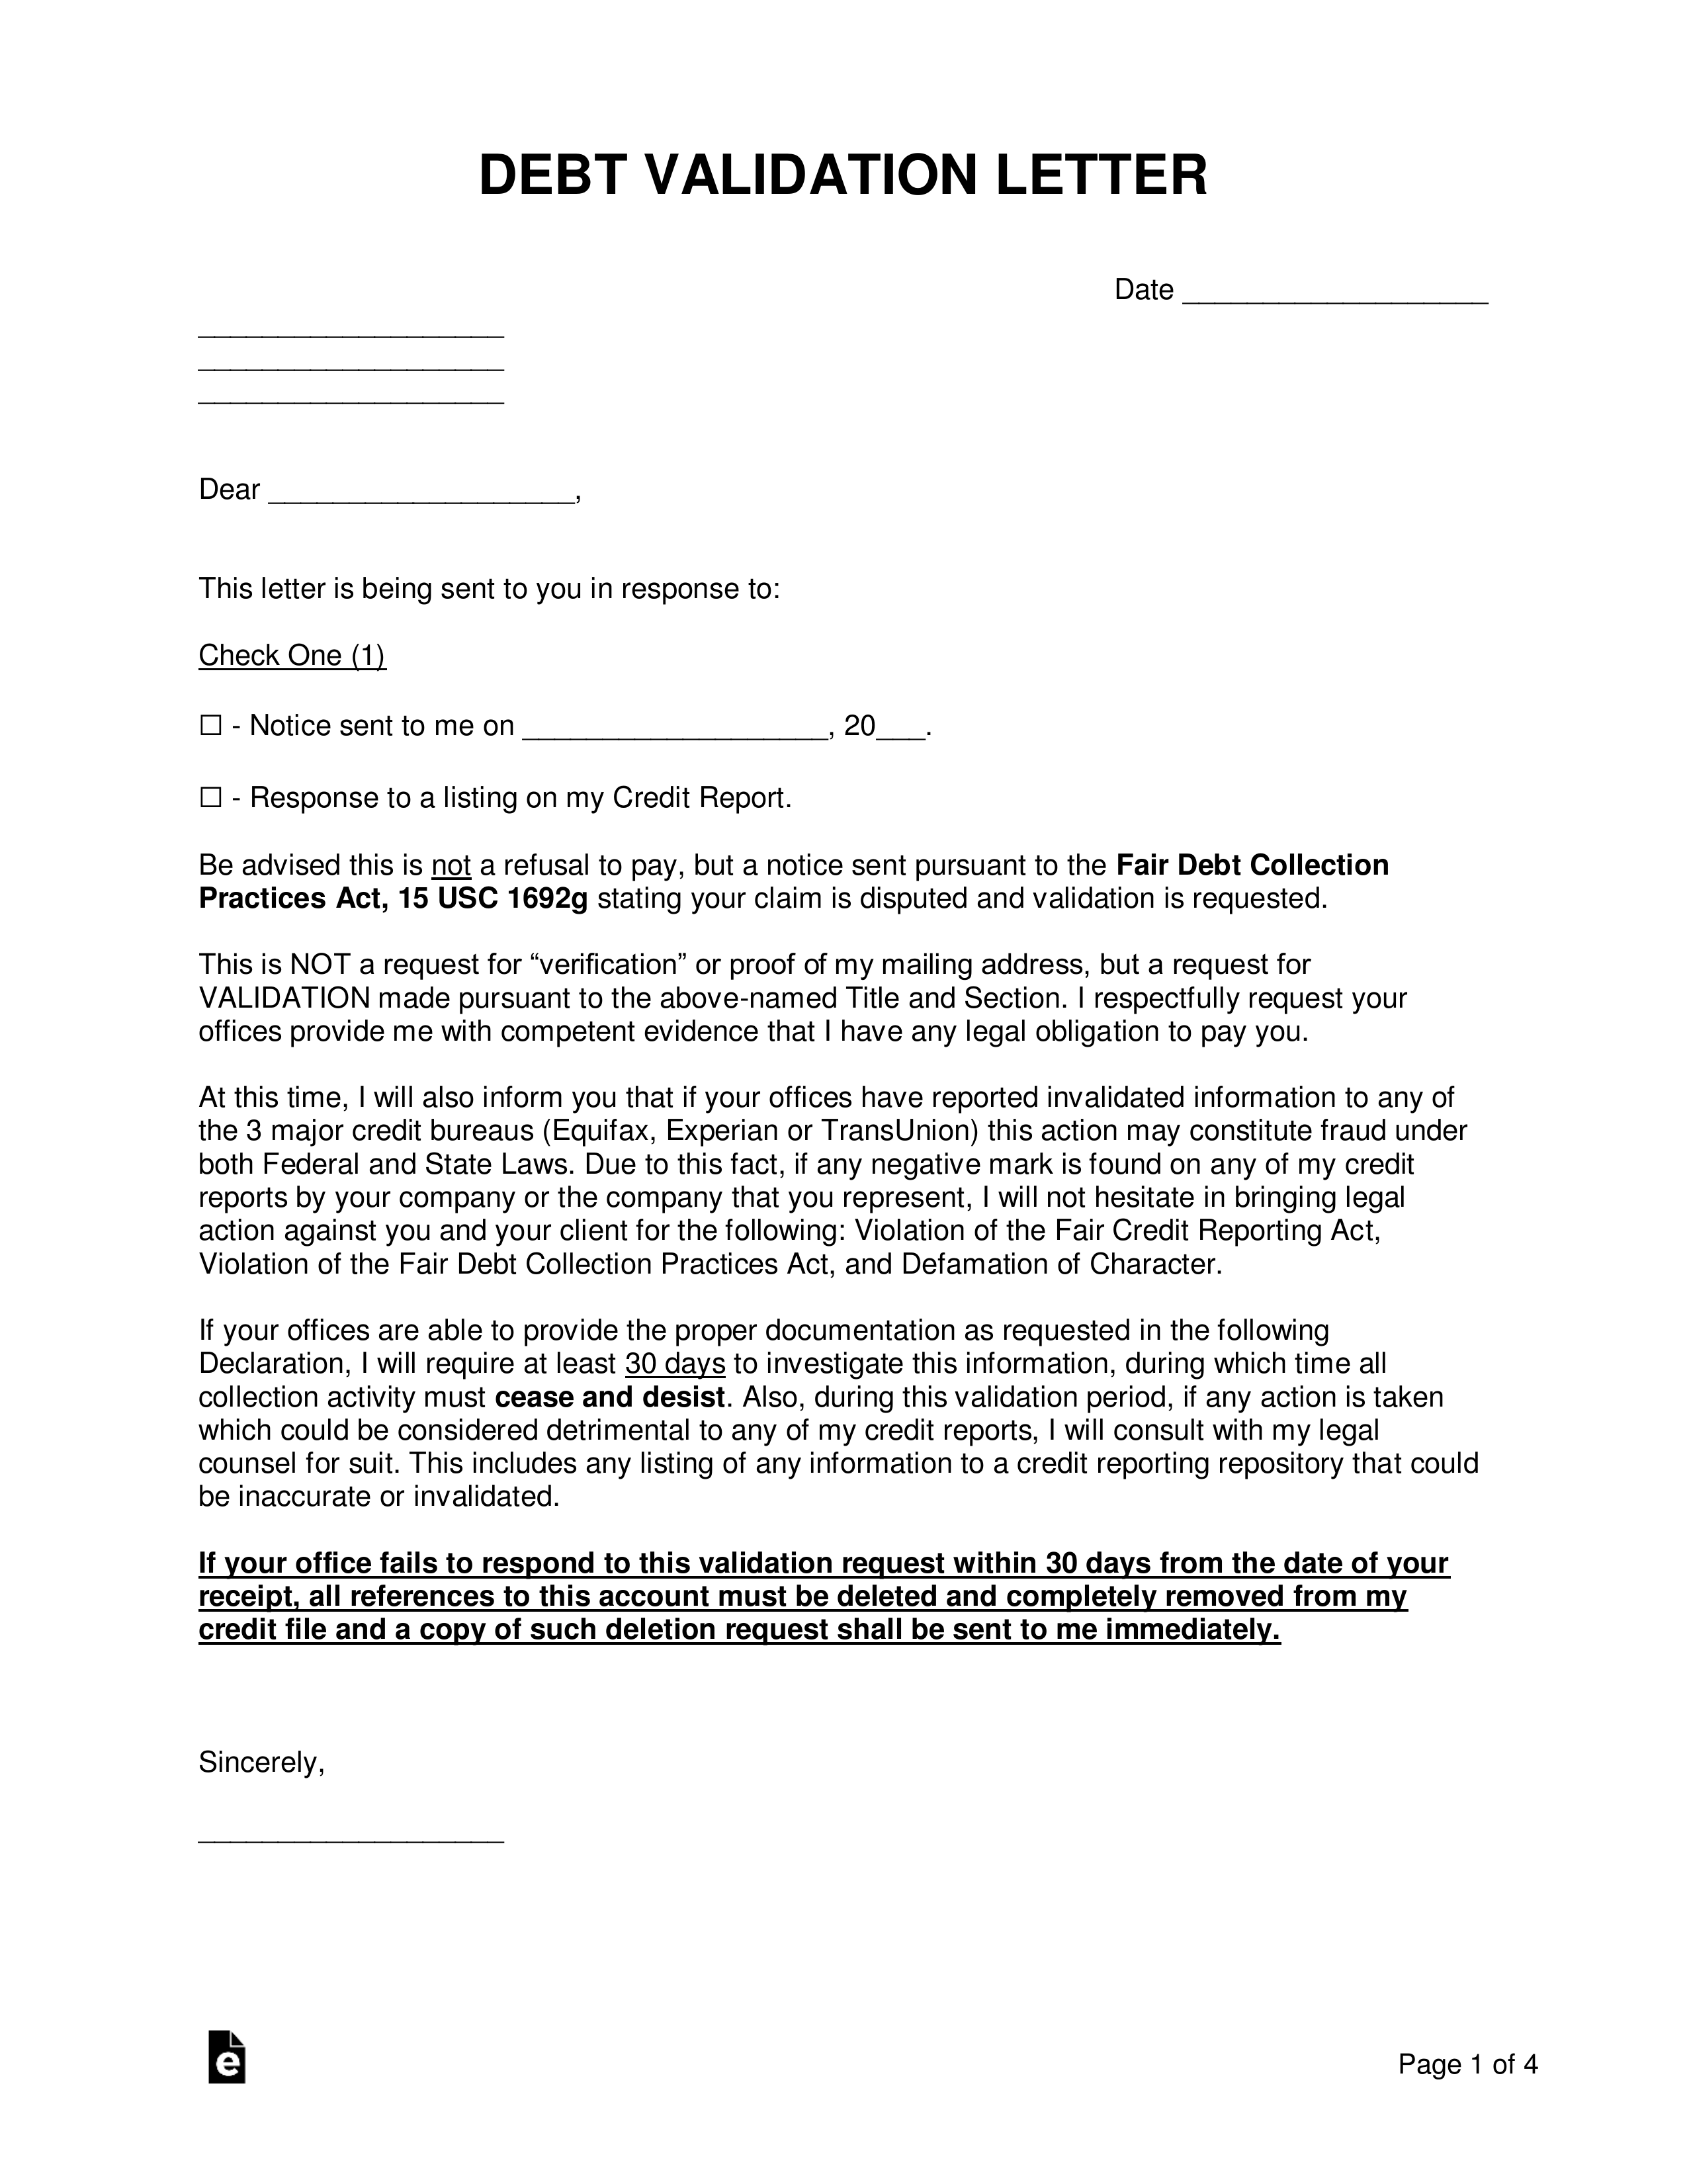 Letter To Dispute Debt from eforms.com